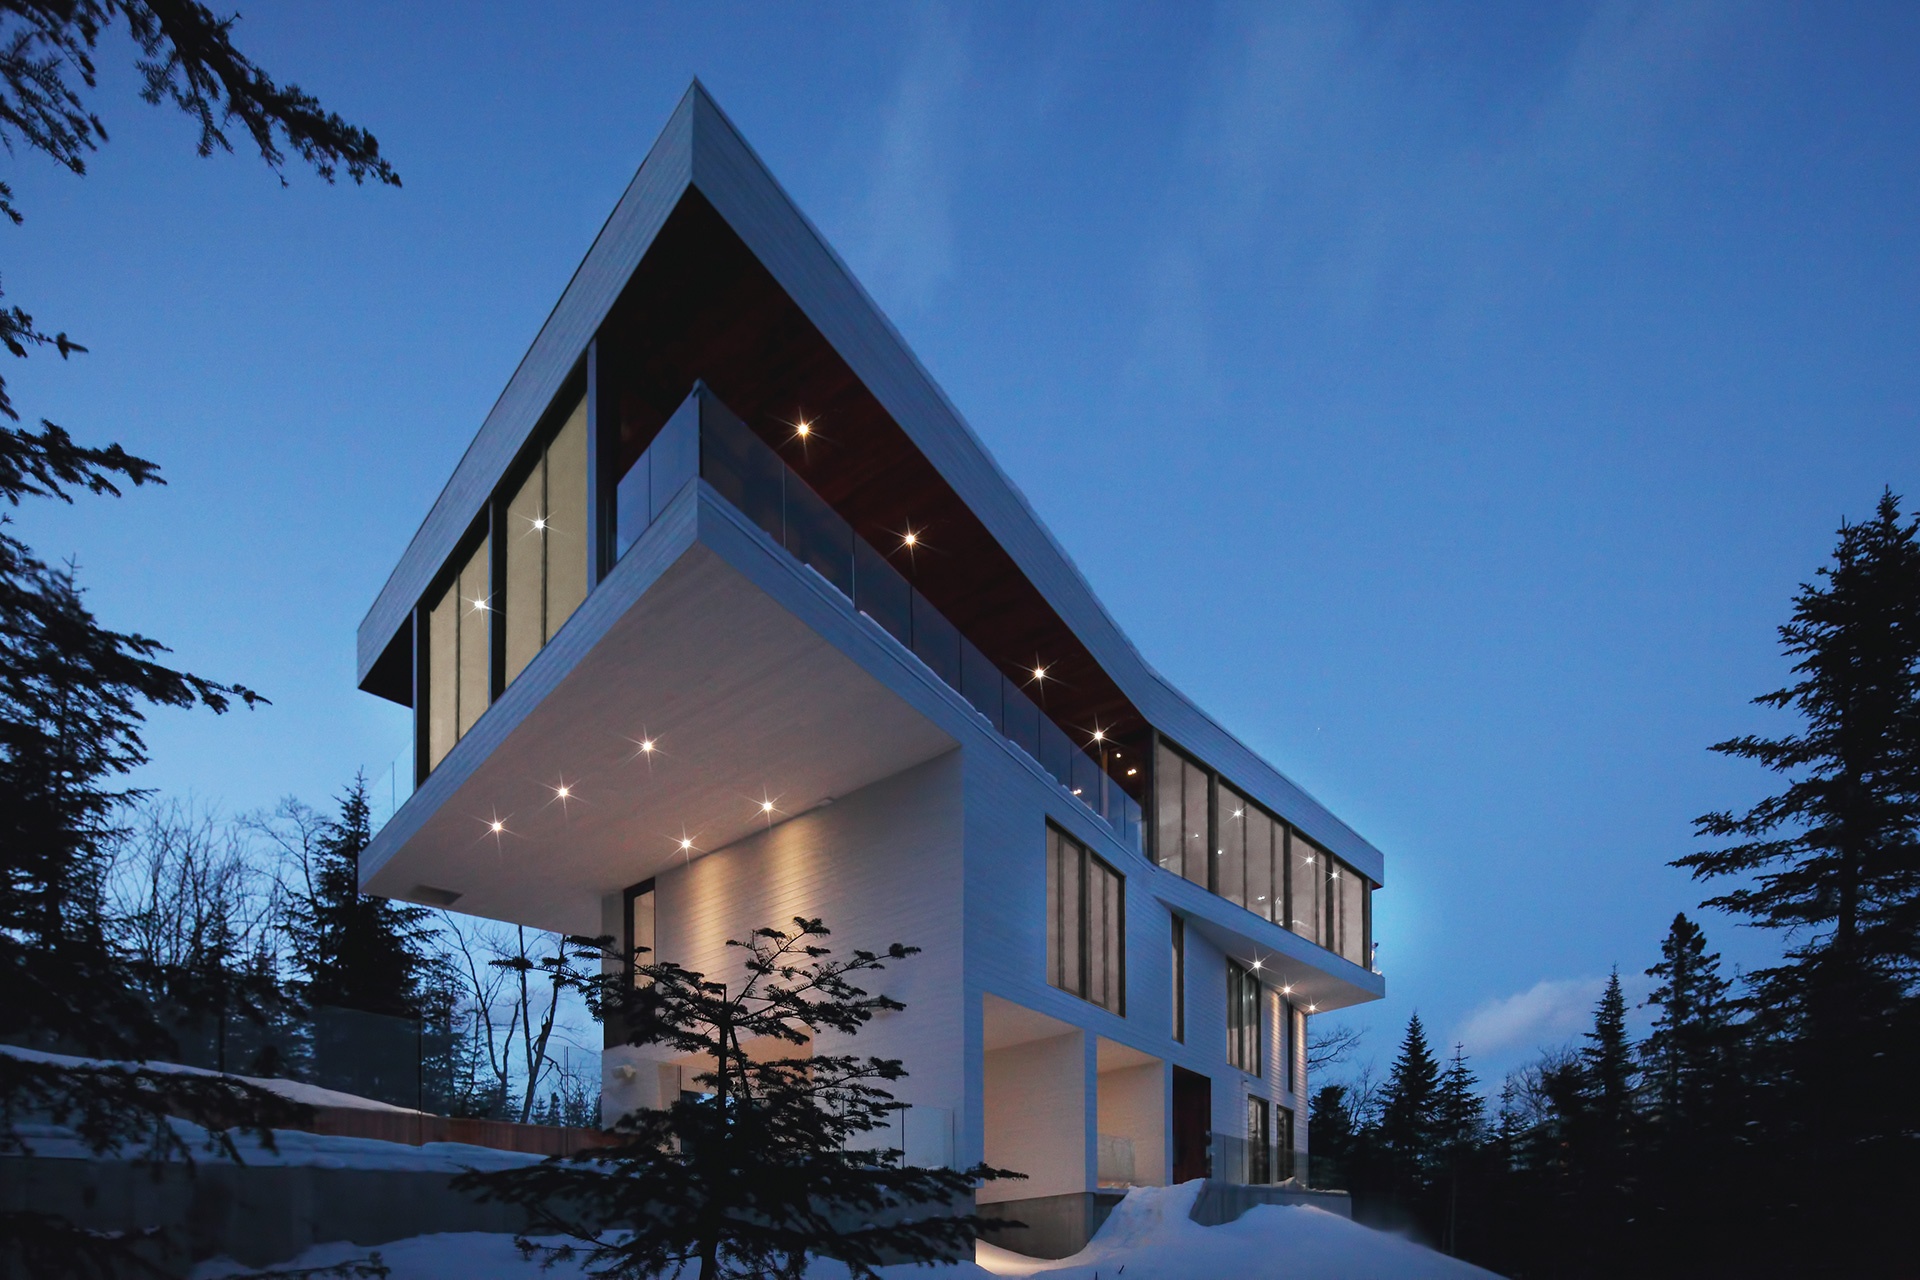 Perched on a promontory overlooking the St. Lawrence River, in Charlevoix, Quebec, this deftly designed home redefines the ski chalet for the 21st century.